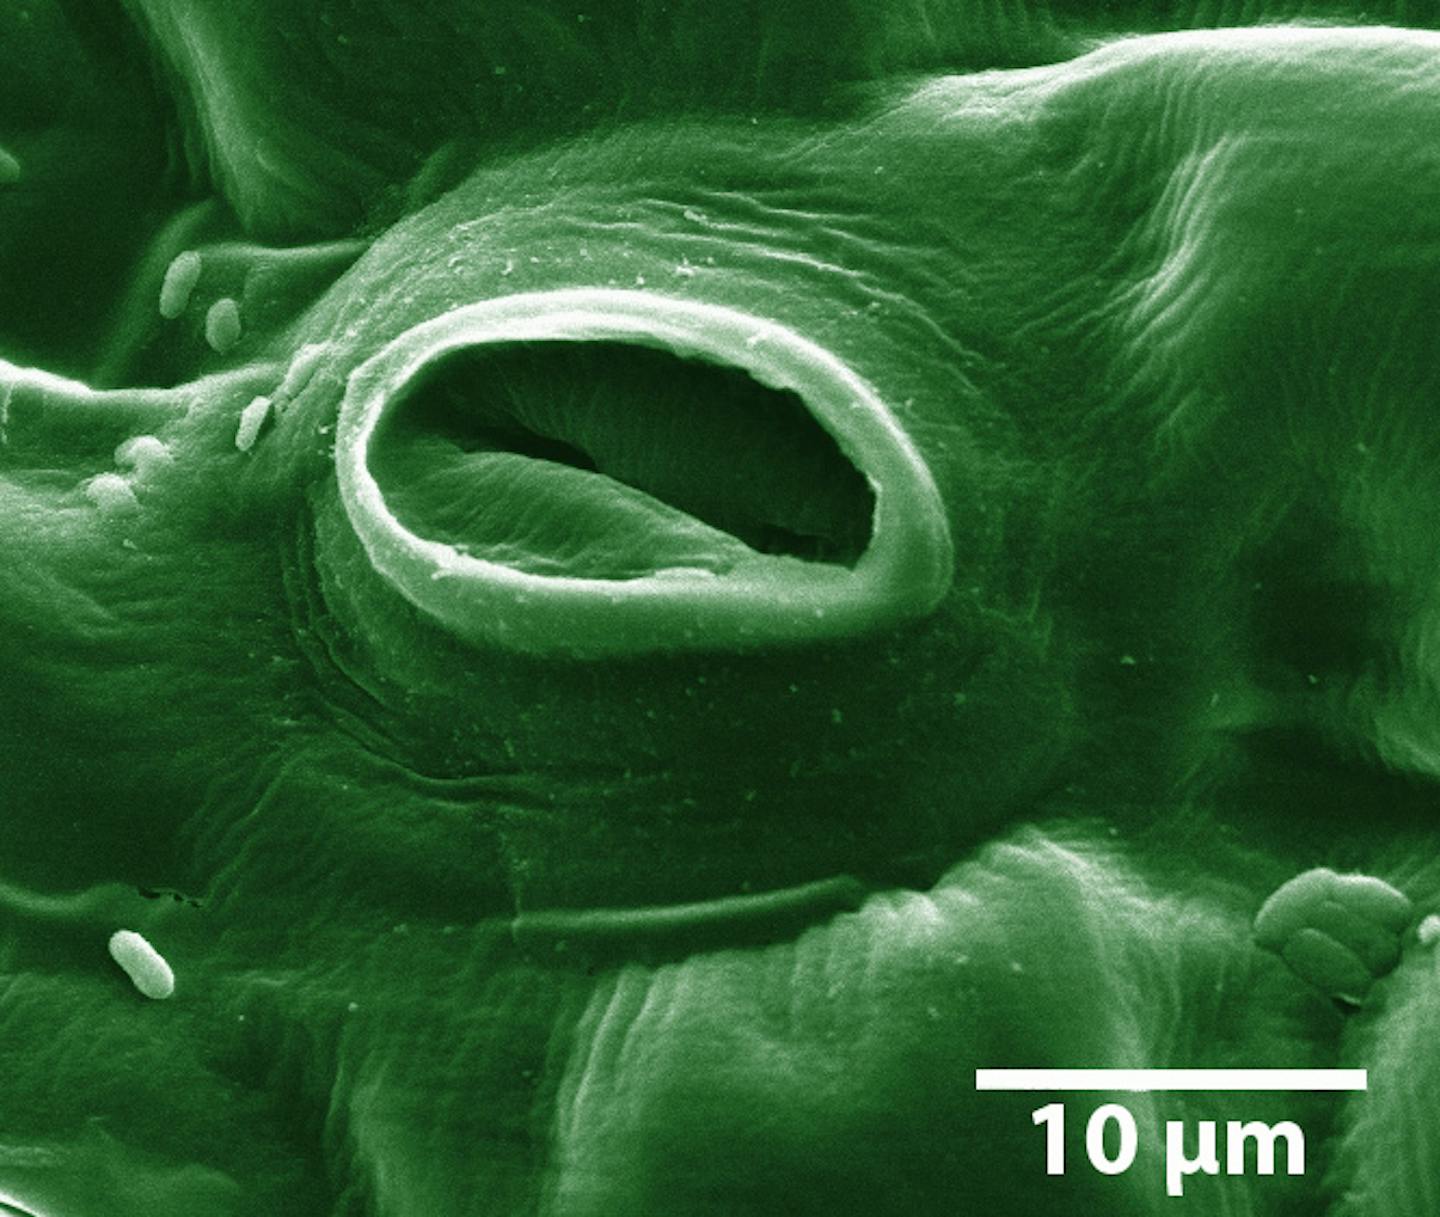 A microscopic photo showing a green mouth shape.